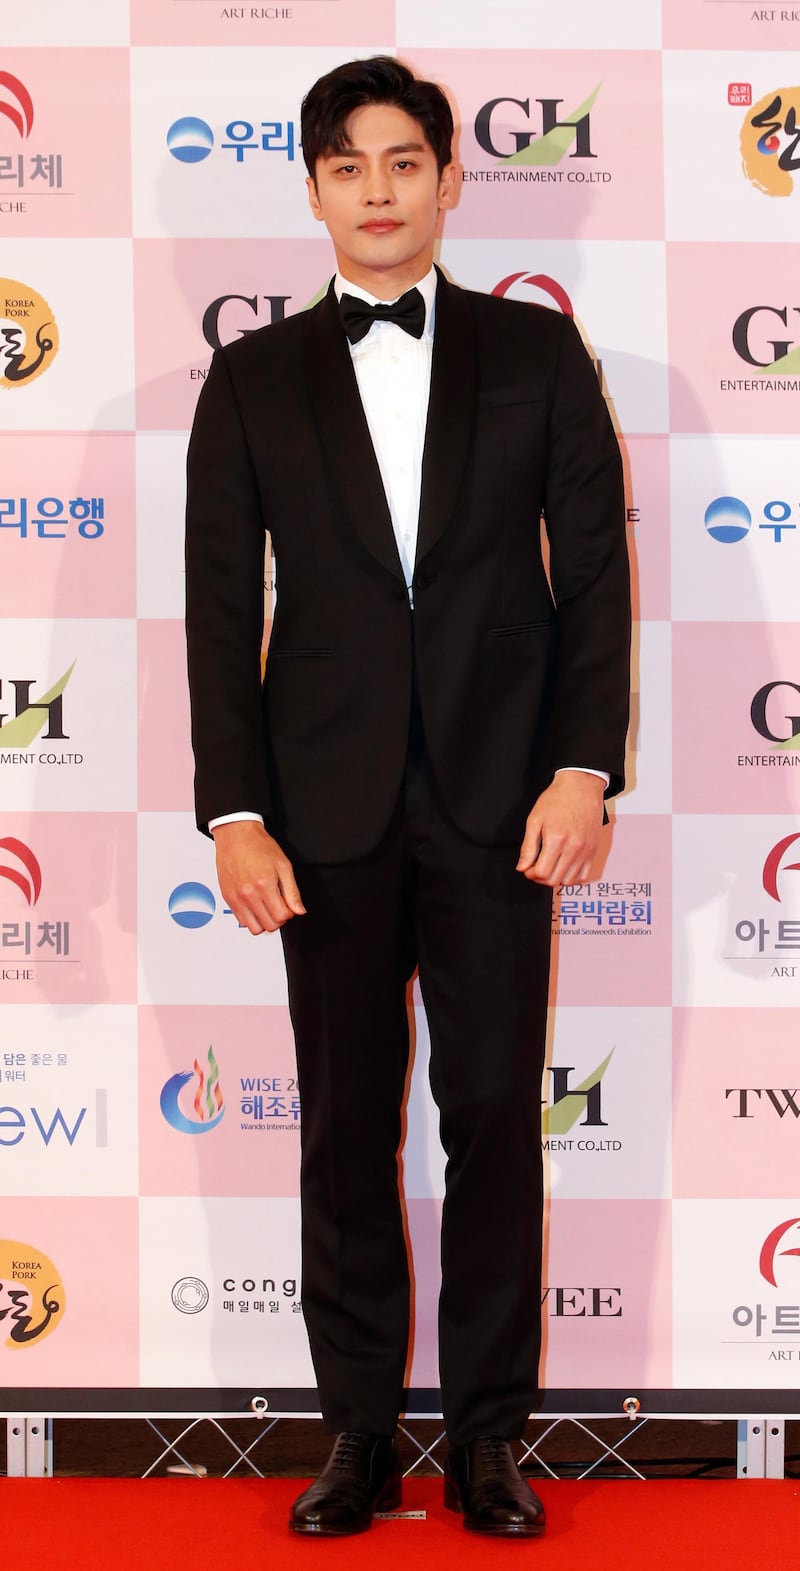 Actor Sung Hoon arrives for the 56th Daejong Film Awards ceremony. EPA